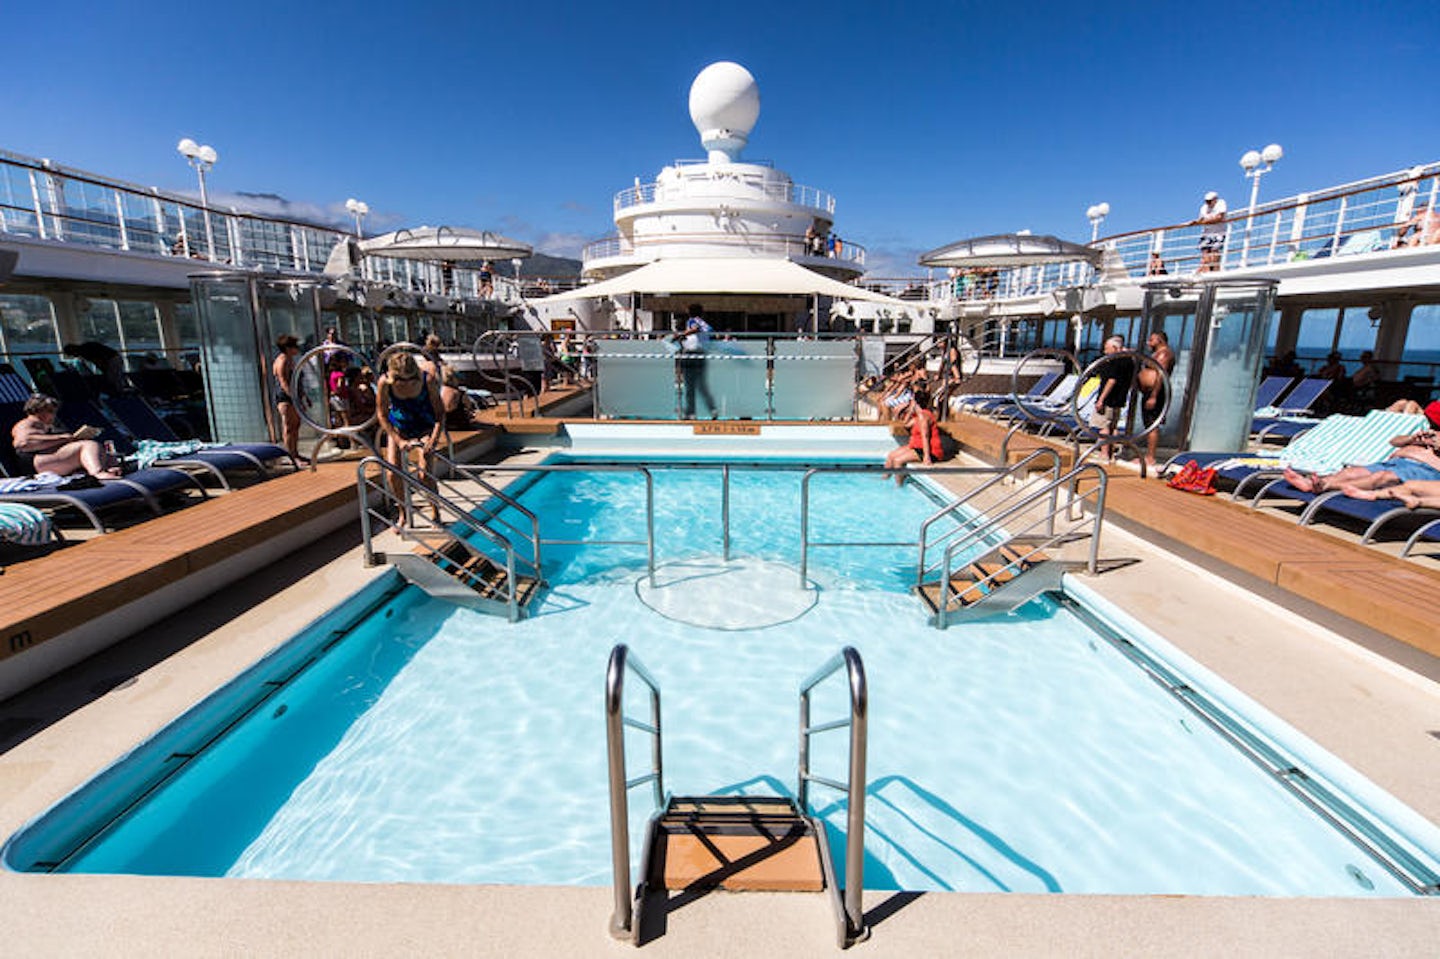 The South Beach Pool on Pride of America